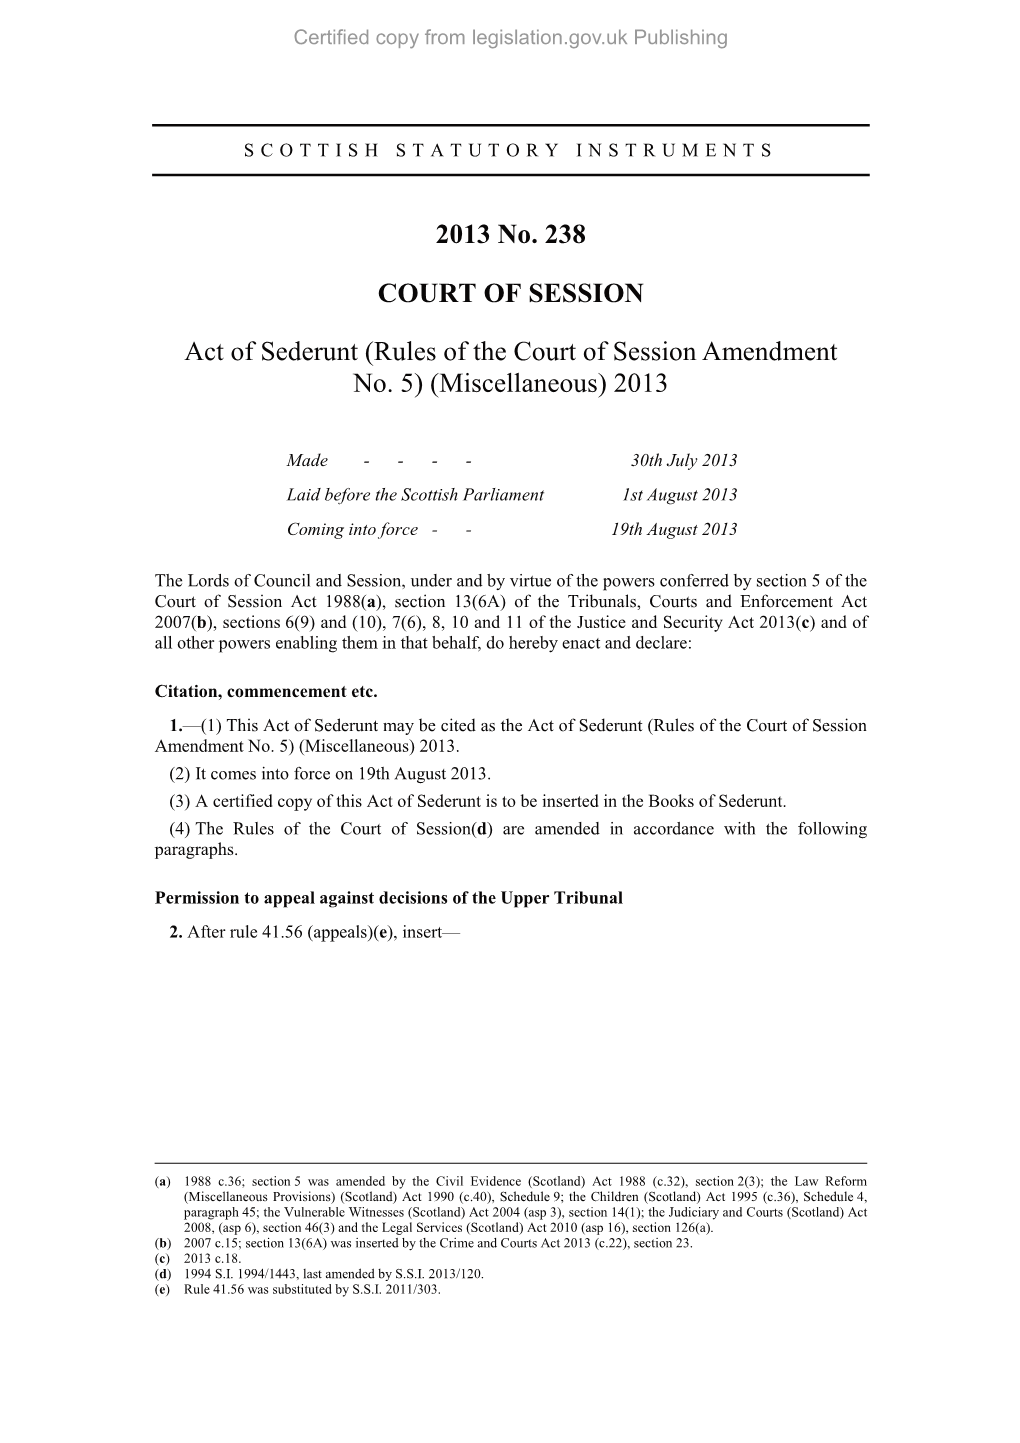 2013 No. 238 COURT of SESSION Act of Sederunt